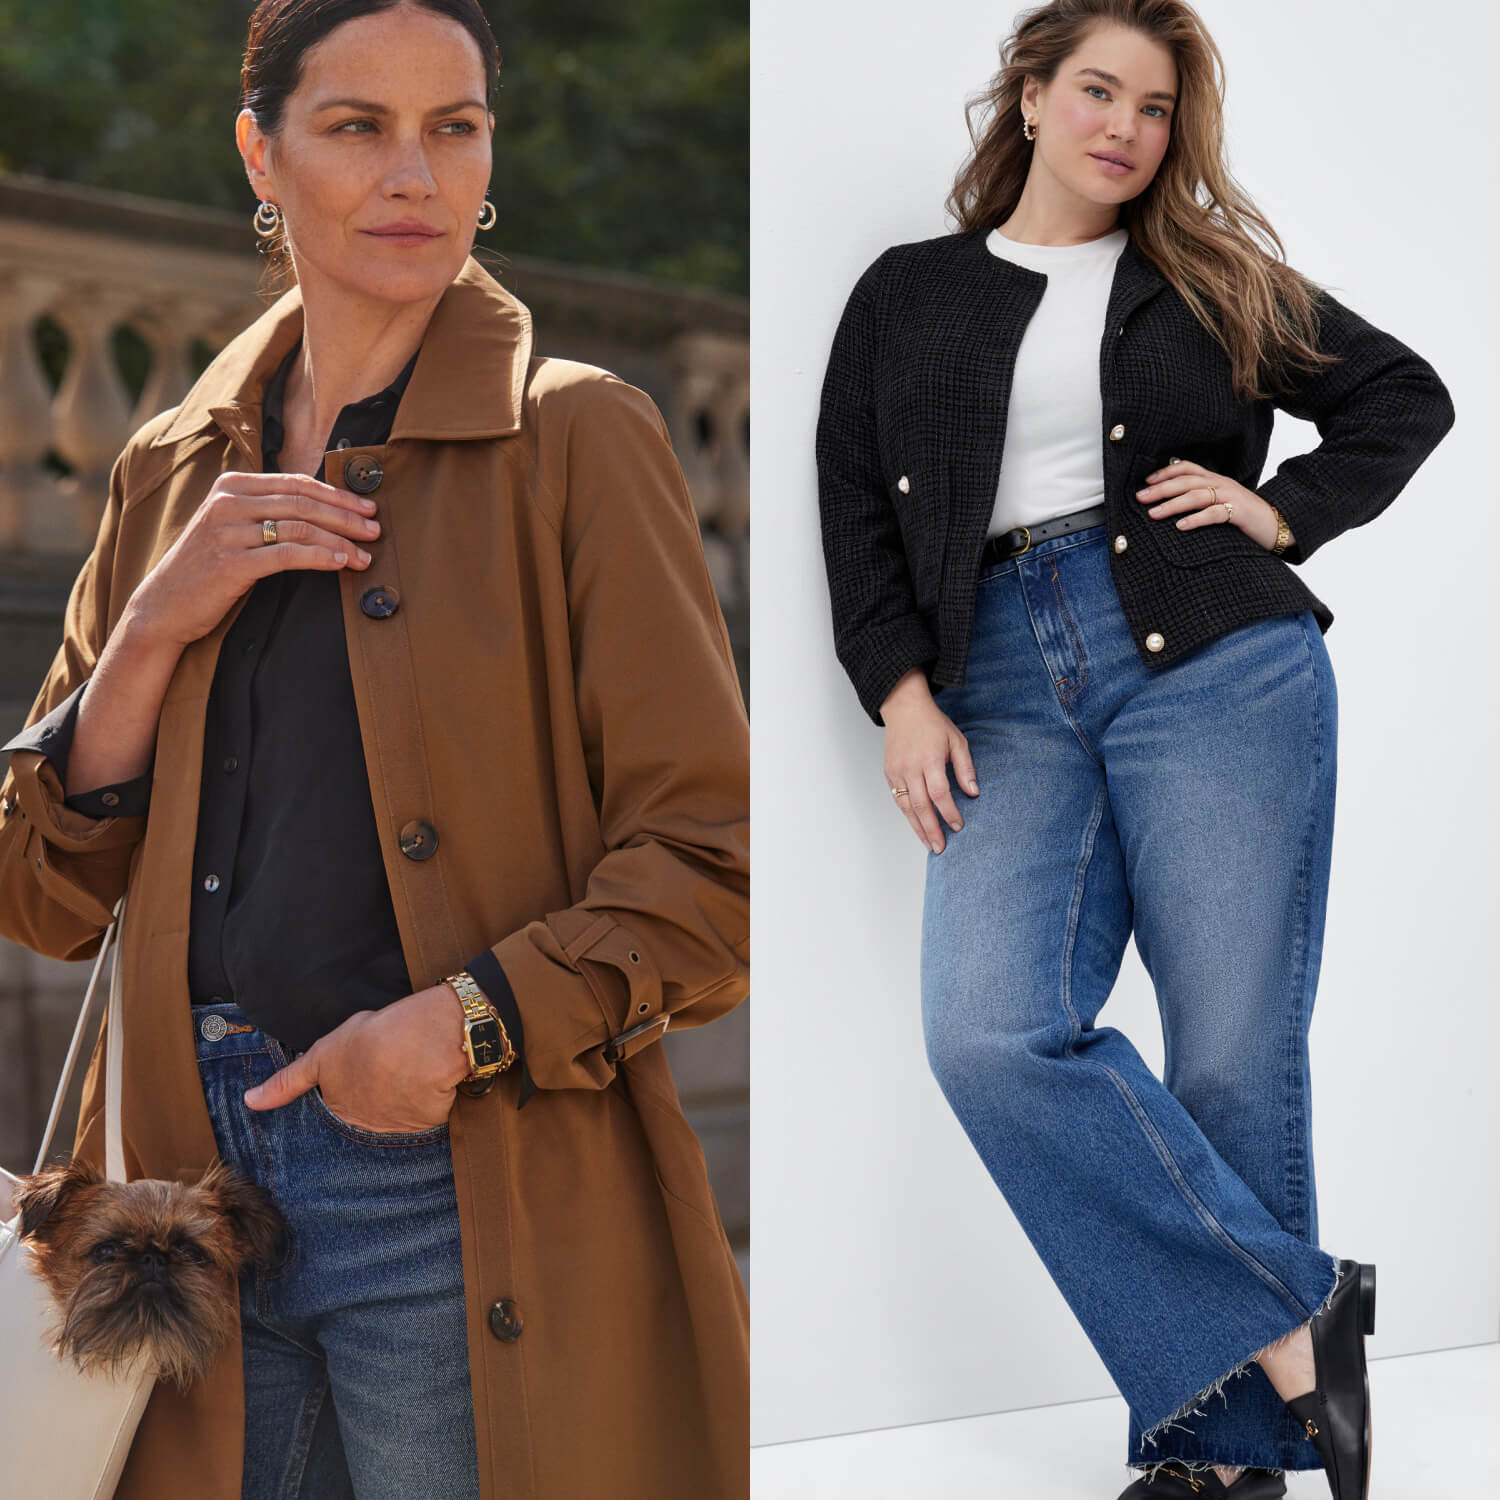 leather pants outfits that are stylish and comfortable for women over 40